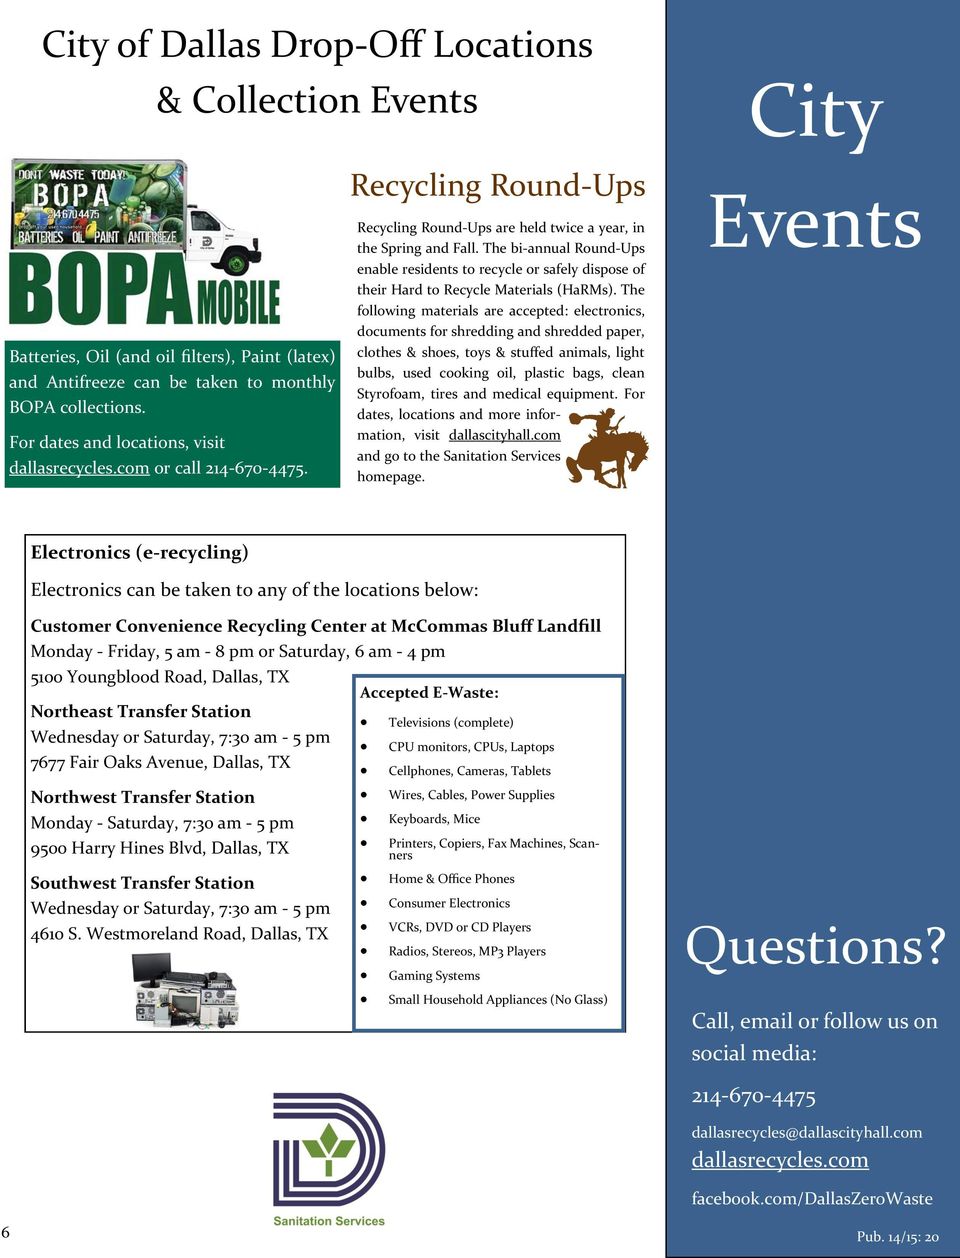 The bi-annual Round-Ups enable residents to recycle or safely dispose of their Hard to Recycle Materials (HaRMs).